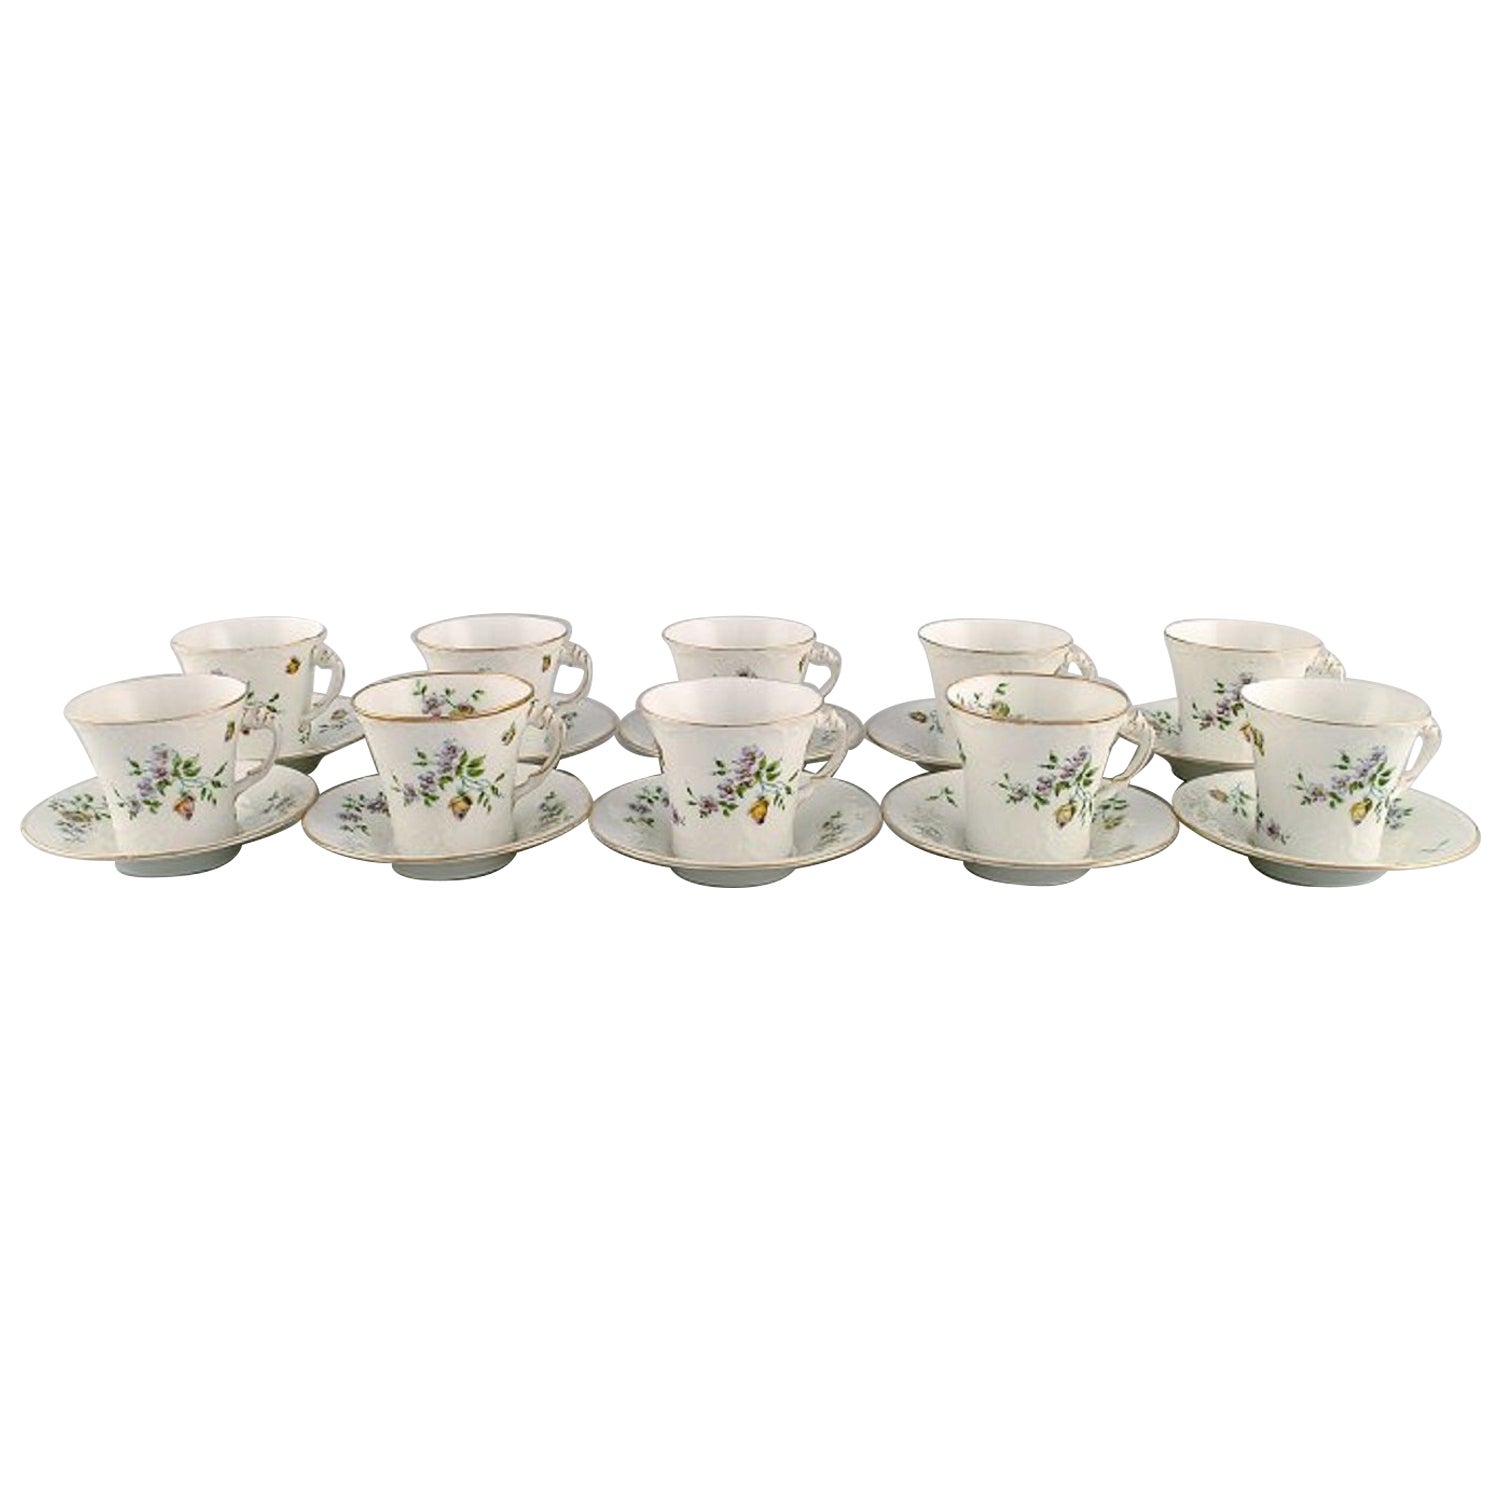 10 Rörstrand coffee cups with saucers in hand-painted porcelain.